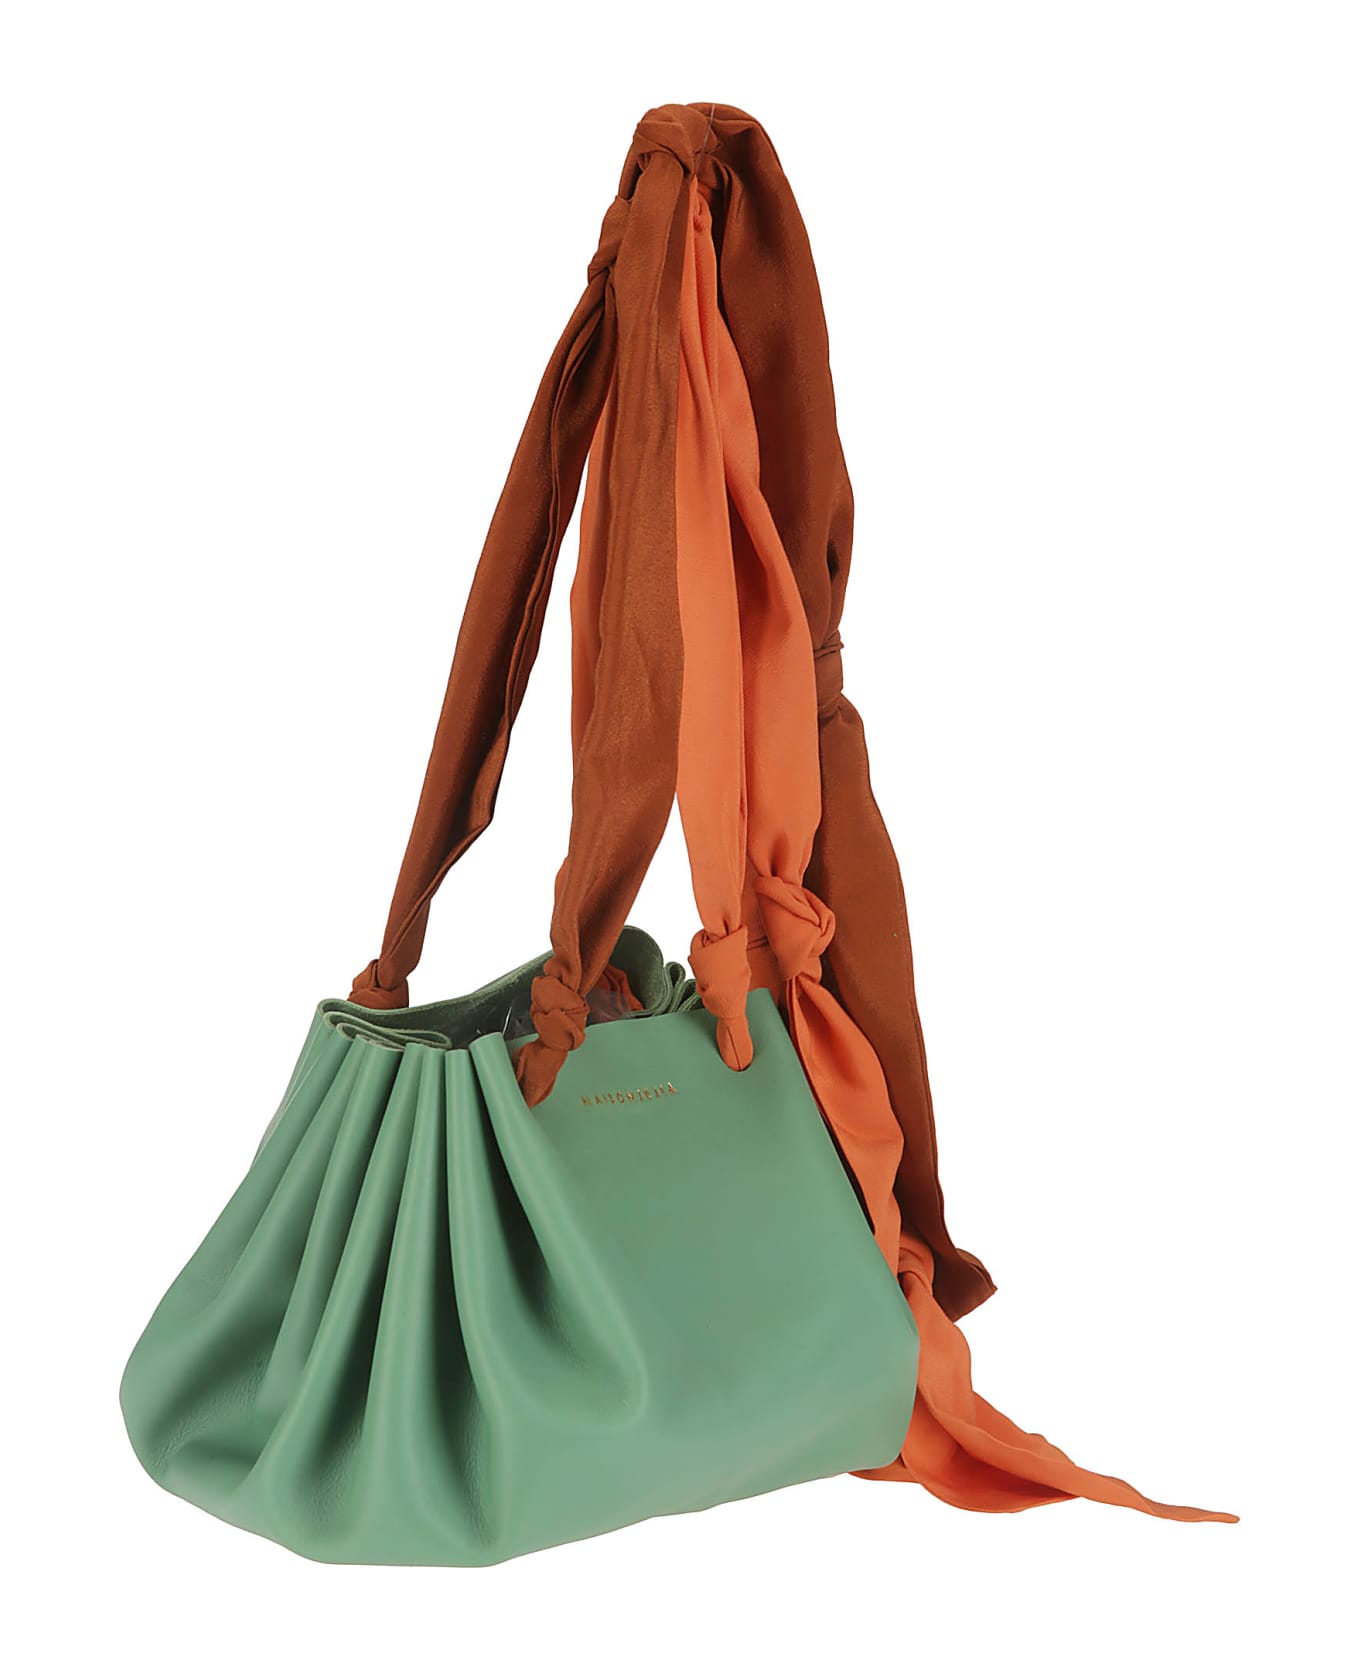 Jejia Loom Baby Bag - GREEN LEATHER A5 COTTON SILK